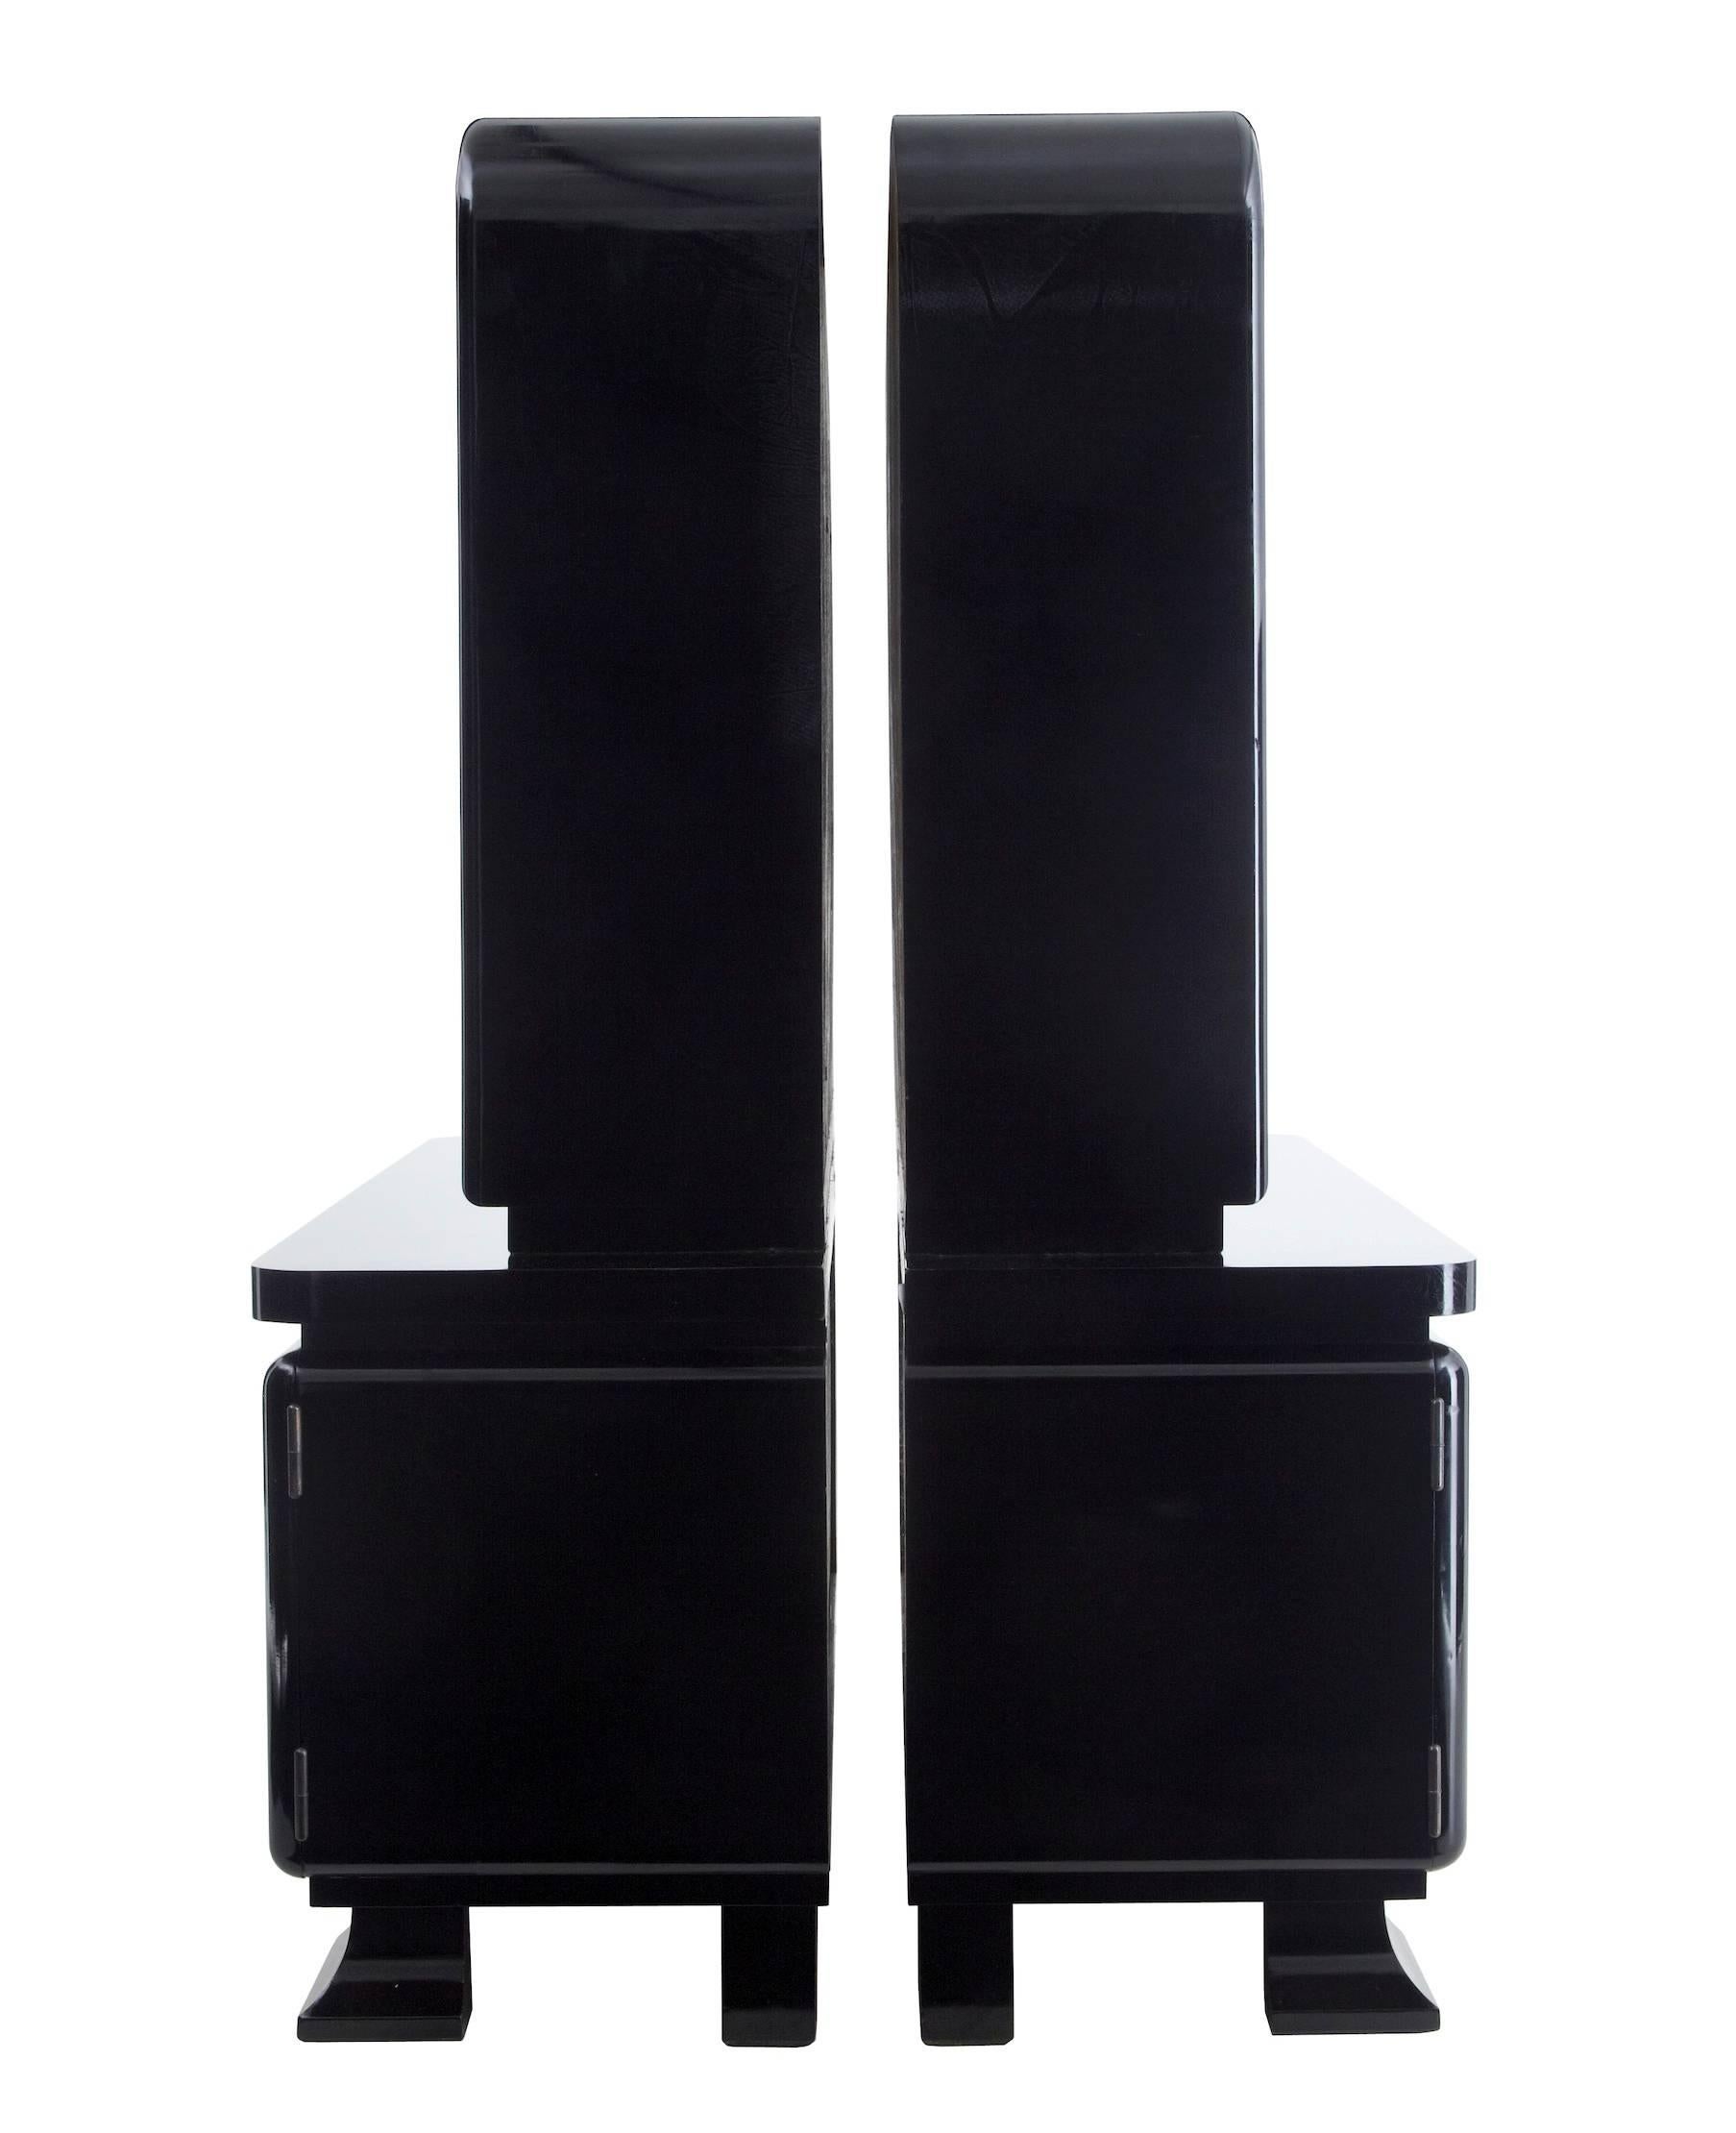 European Stunning Pair of Art Deco Black Lacquered Cabinets